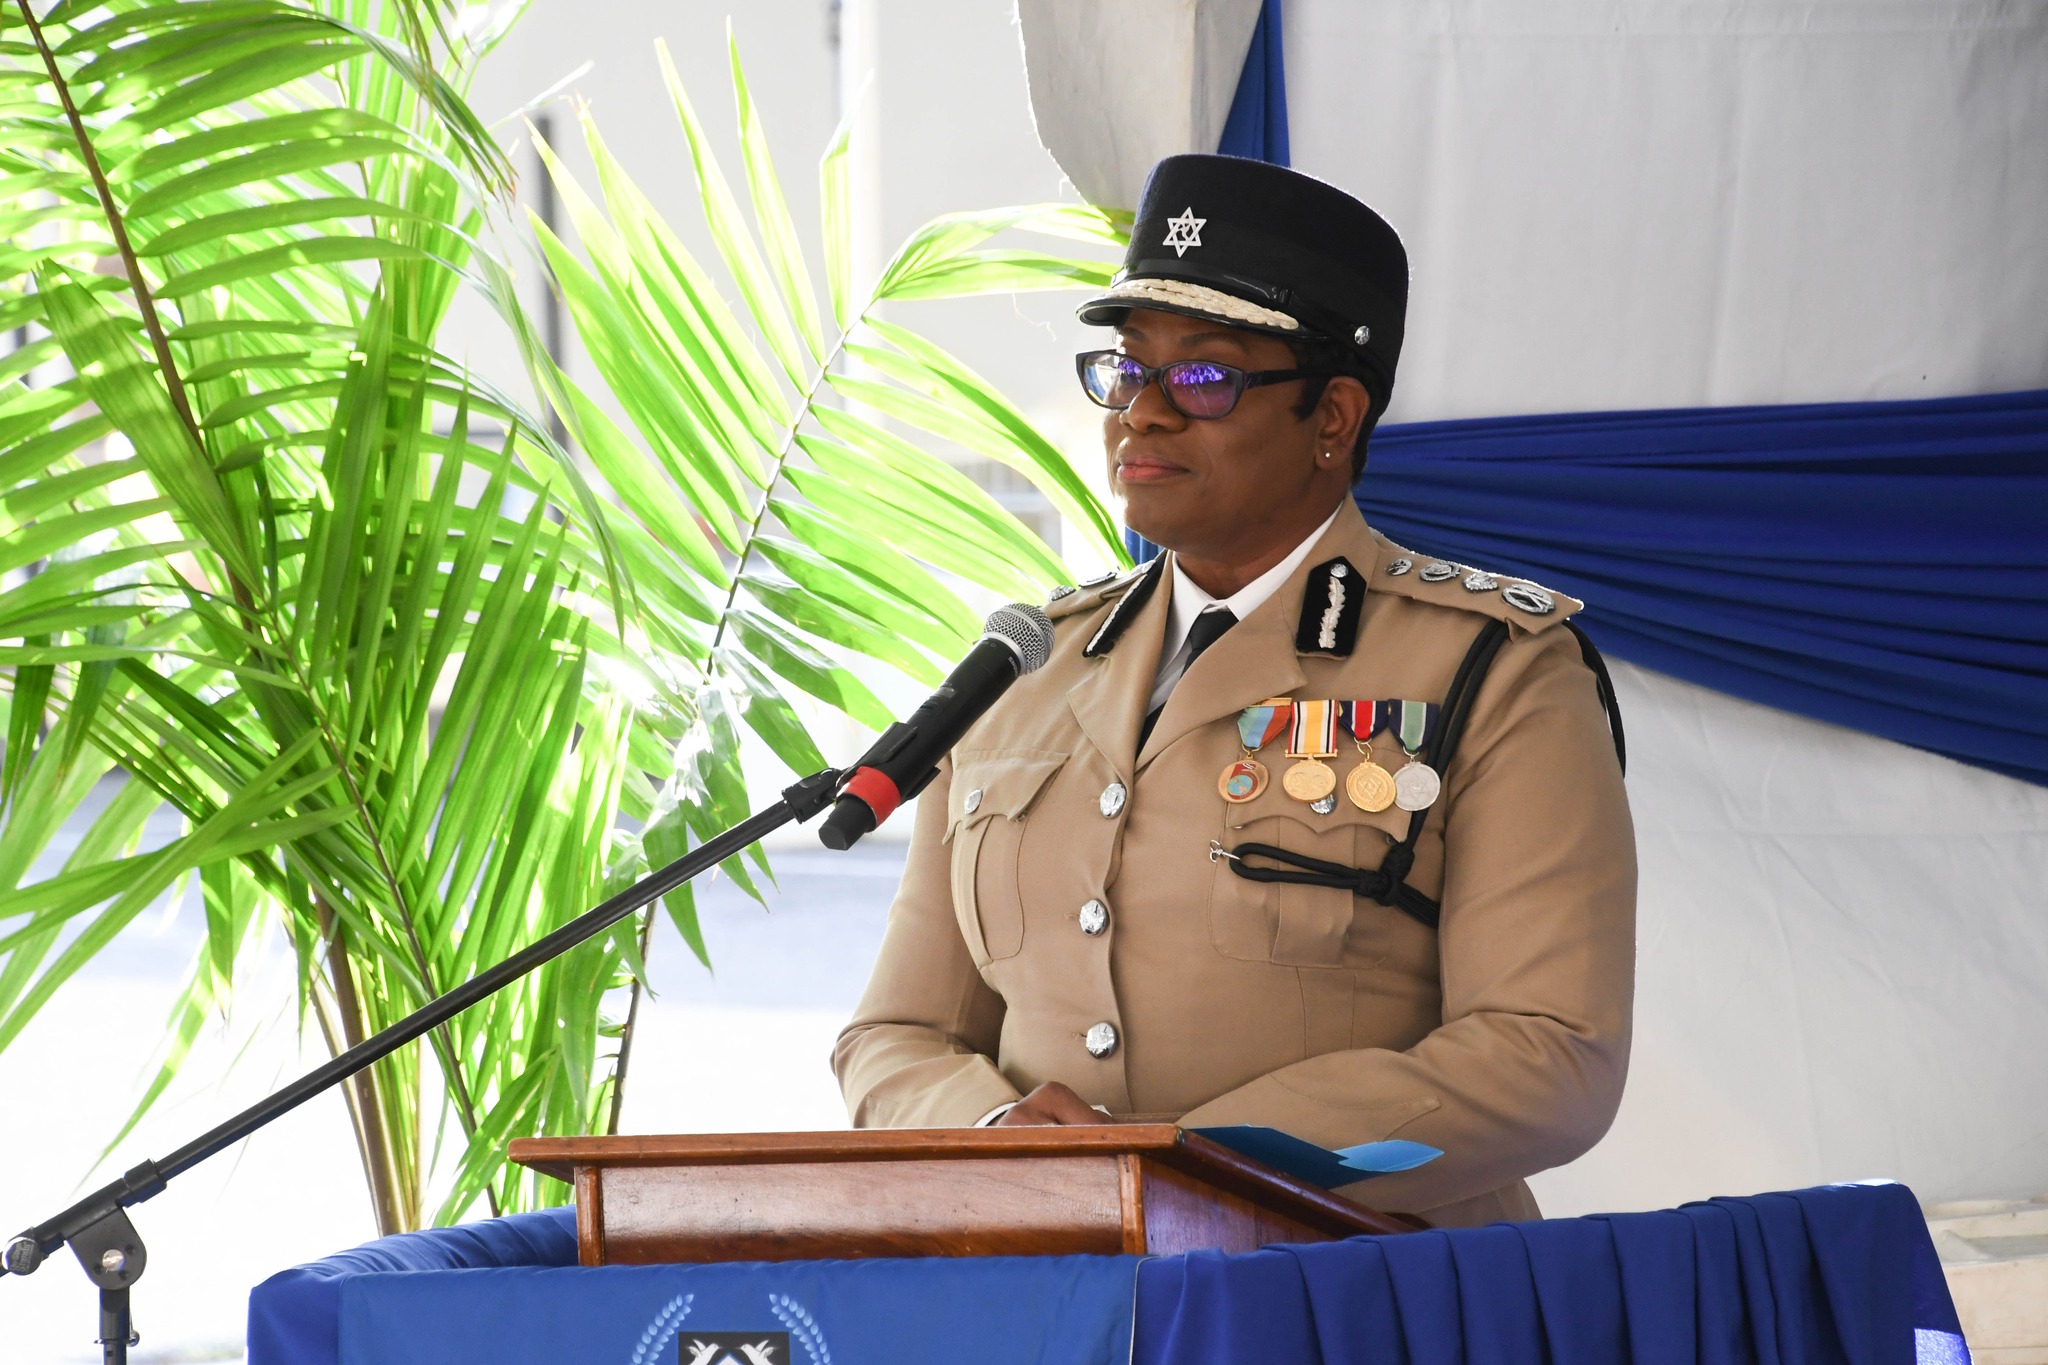 CoP tells 156 new officers to let their service bear the hallmarks of P.R.I.D.E.